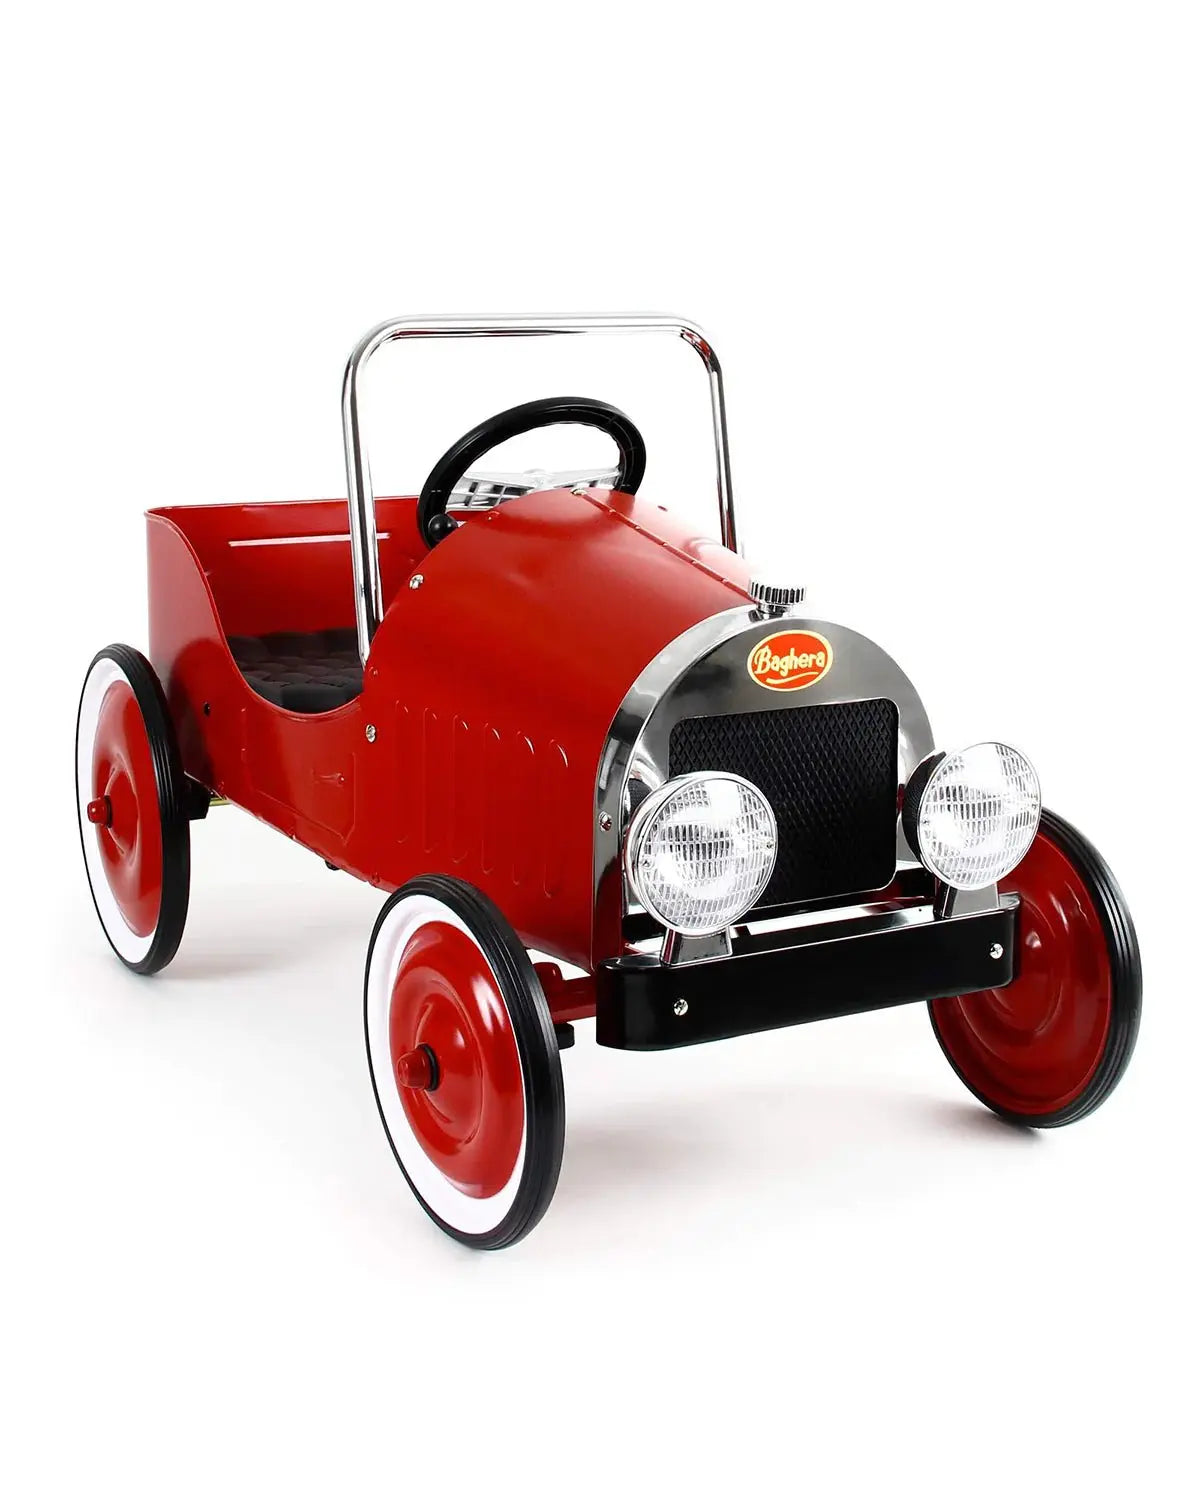 Classic Pedal Car for Kids, Adjustable Ride-on Toy, Durable Steel Construction, Retro Style  Baghera Red  